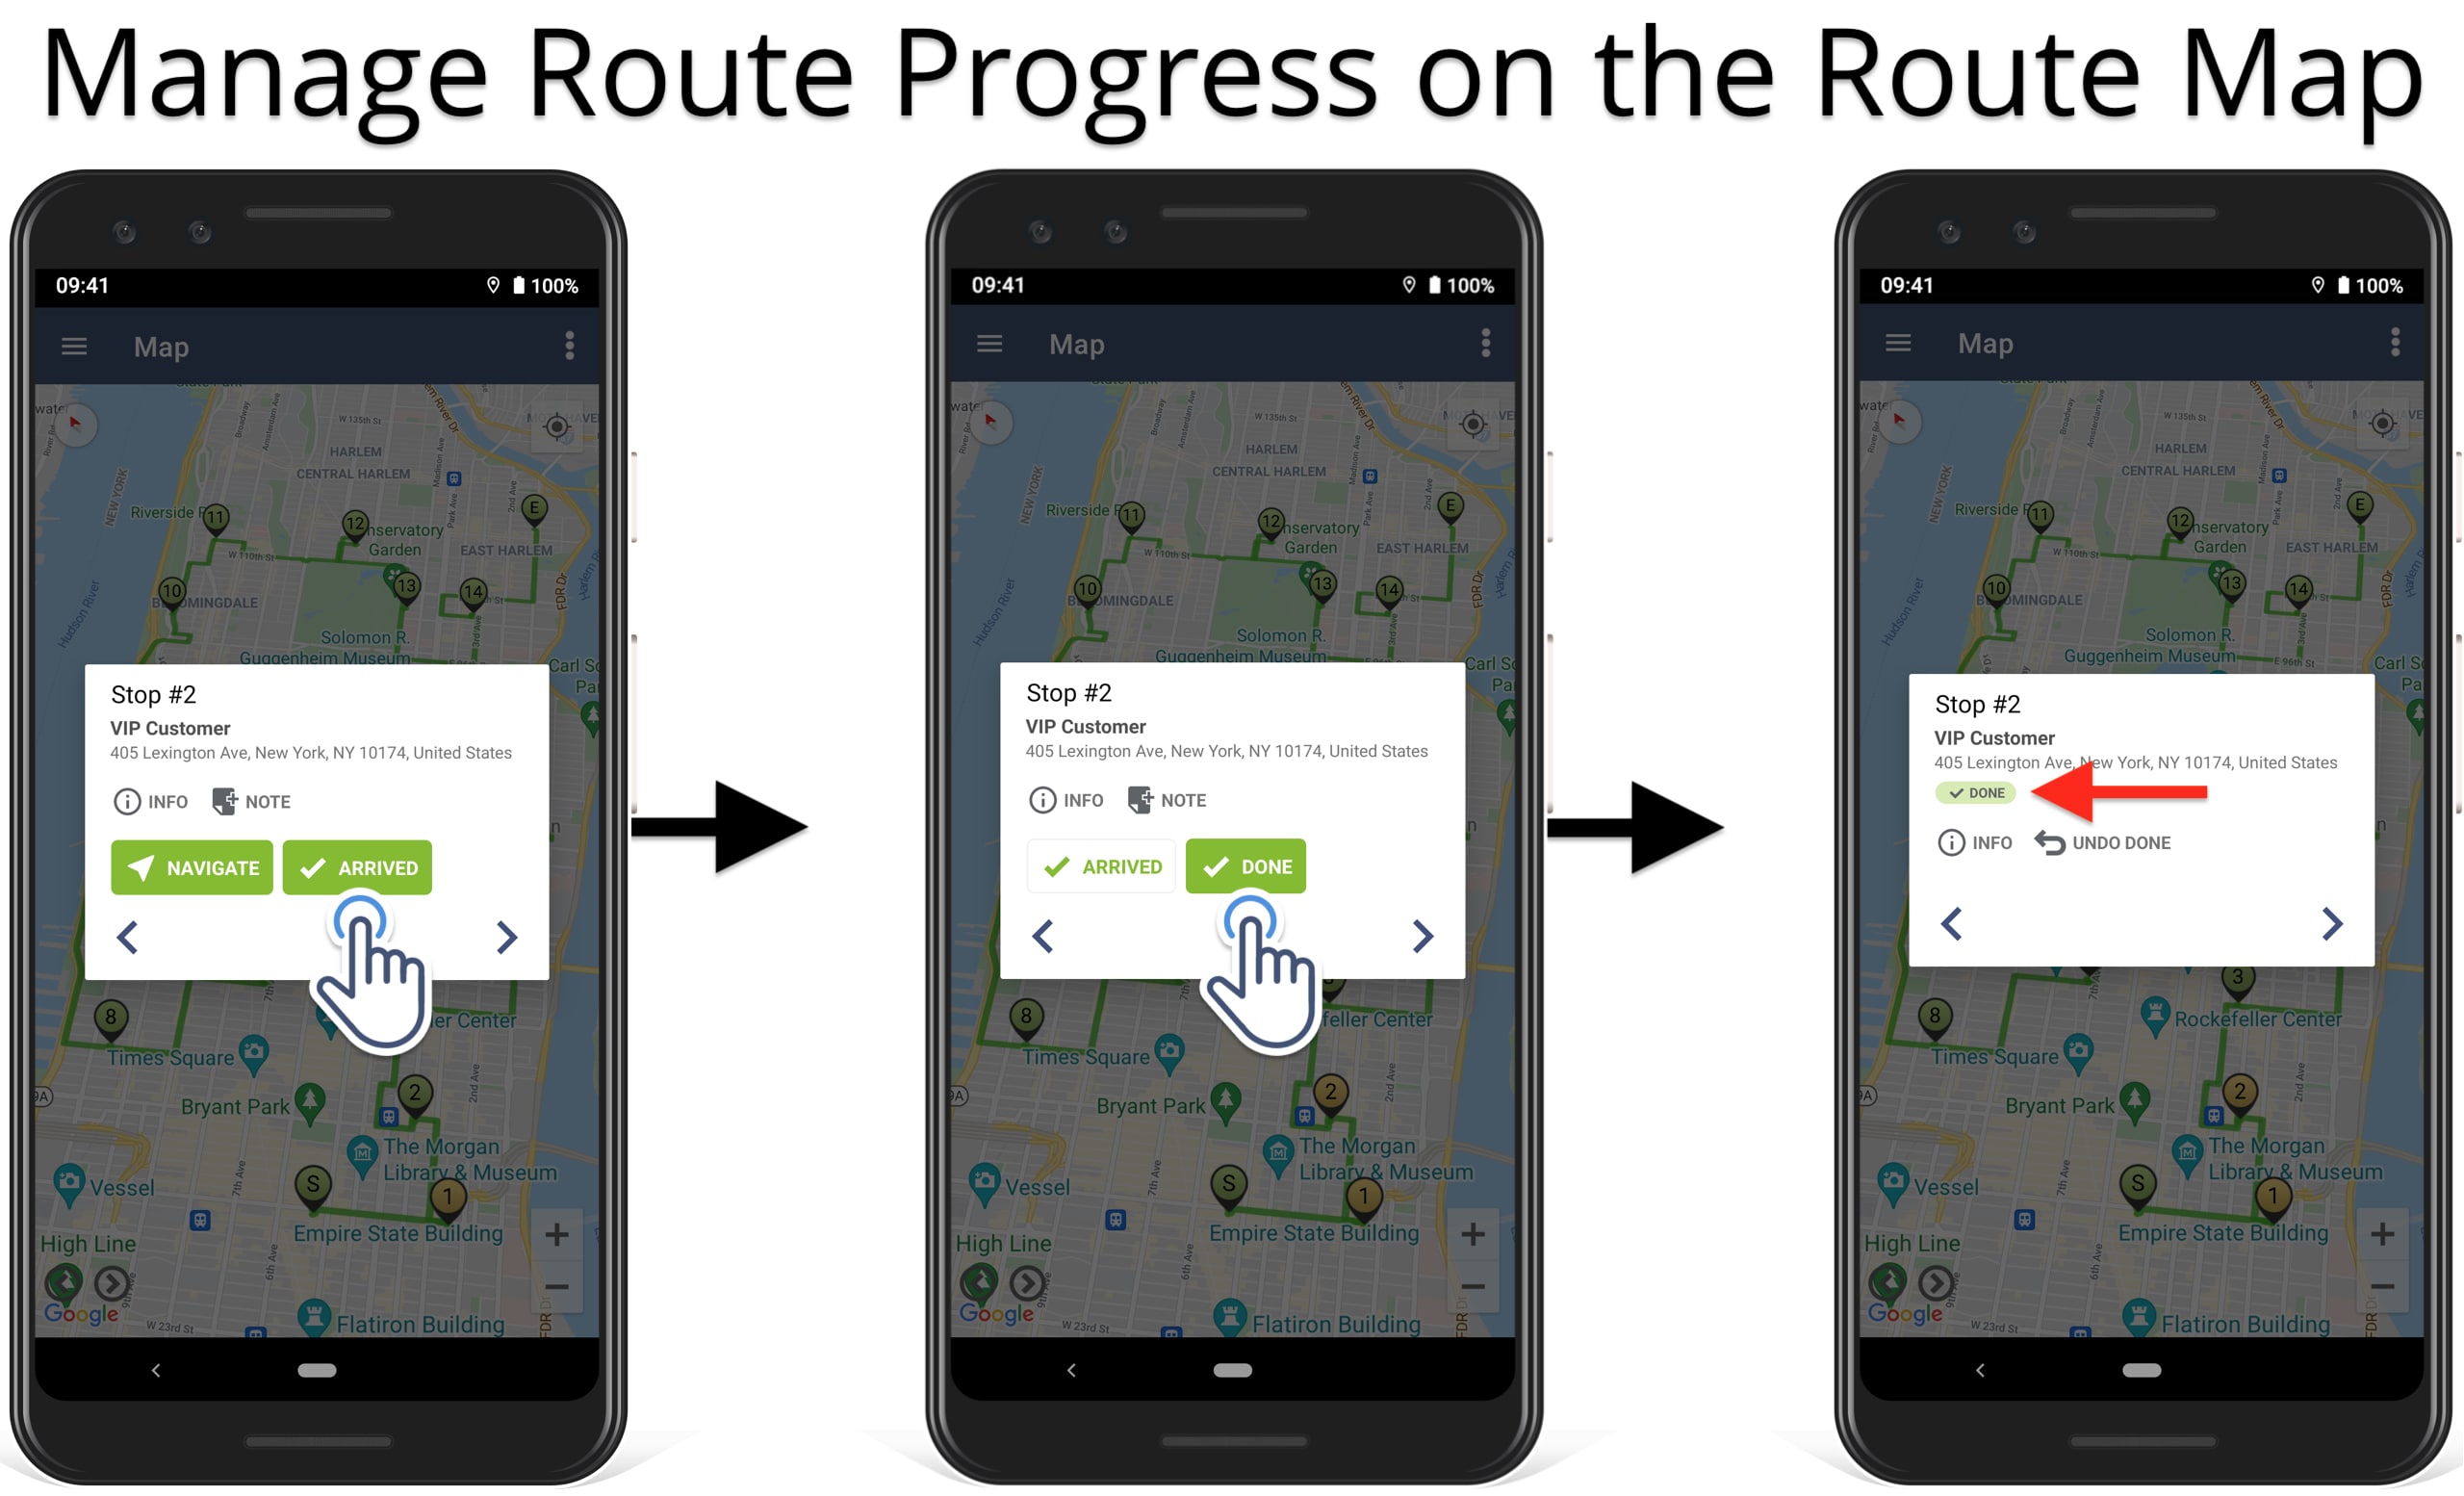 Use route planner map to mark stops as Arrived and Departed and track delivery route progress.